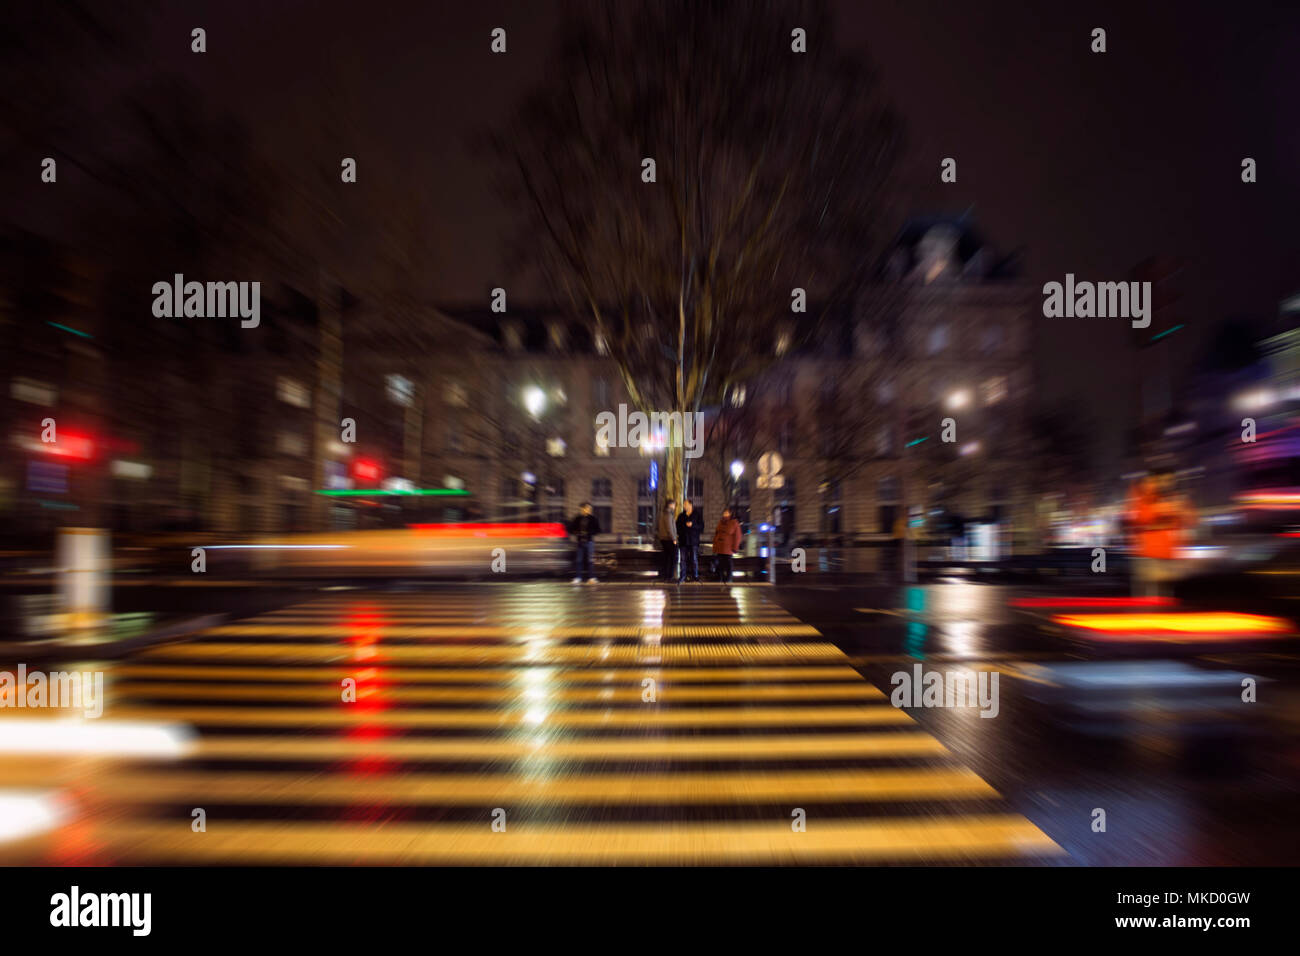 Blurry motion image of people waiting to cross at lights in Republique square at night in Paris. Stock Photo